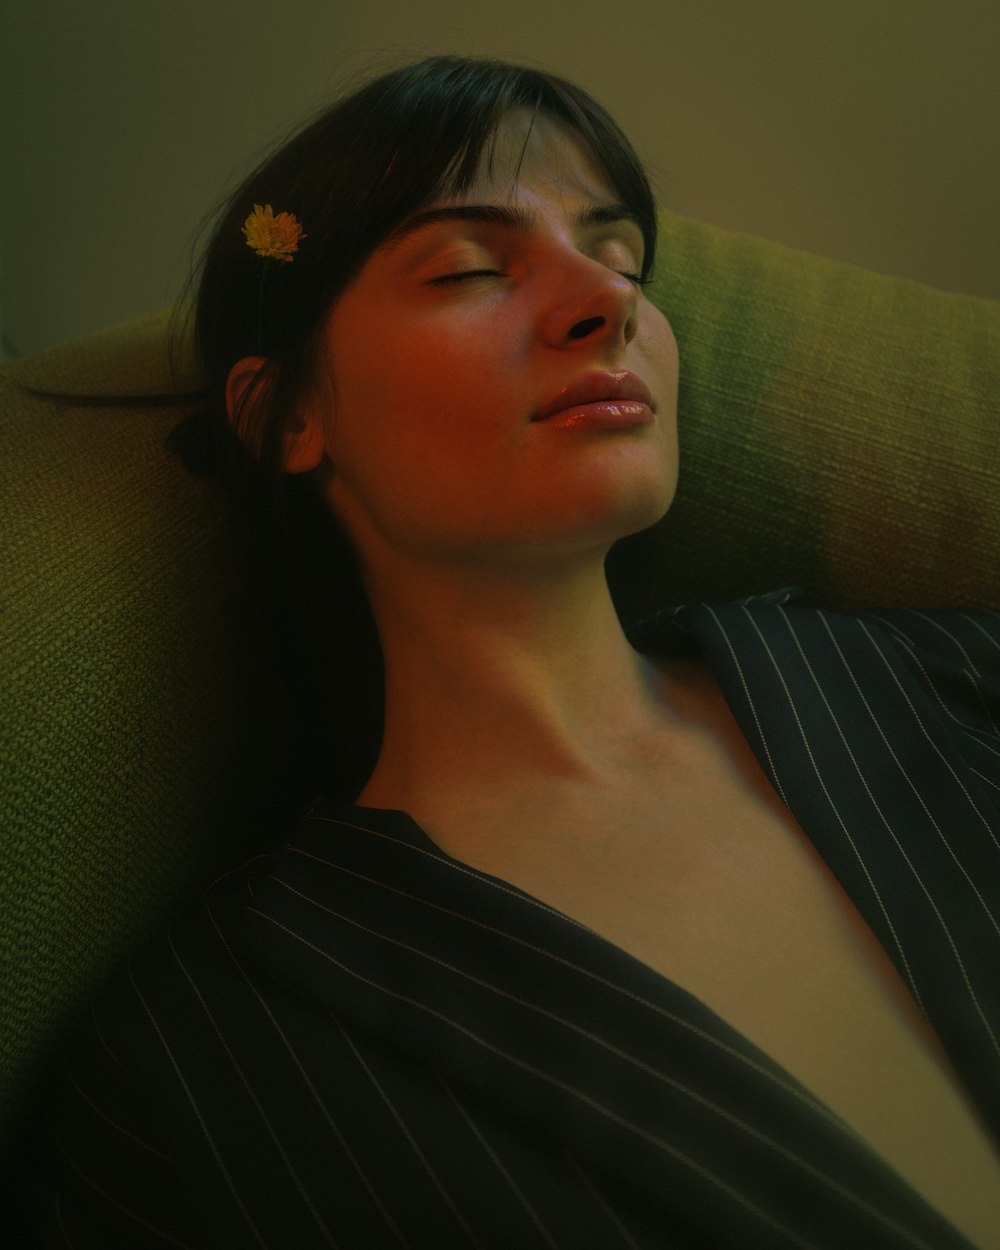 a woman sleeping on a couch with a flower in her hair